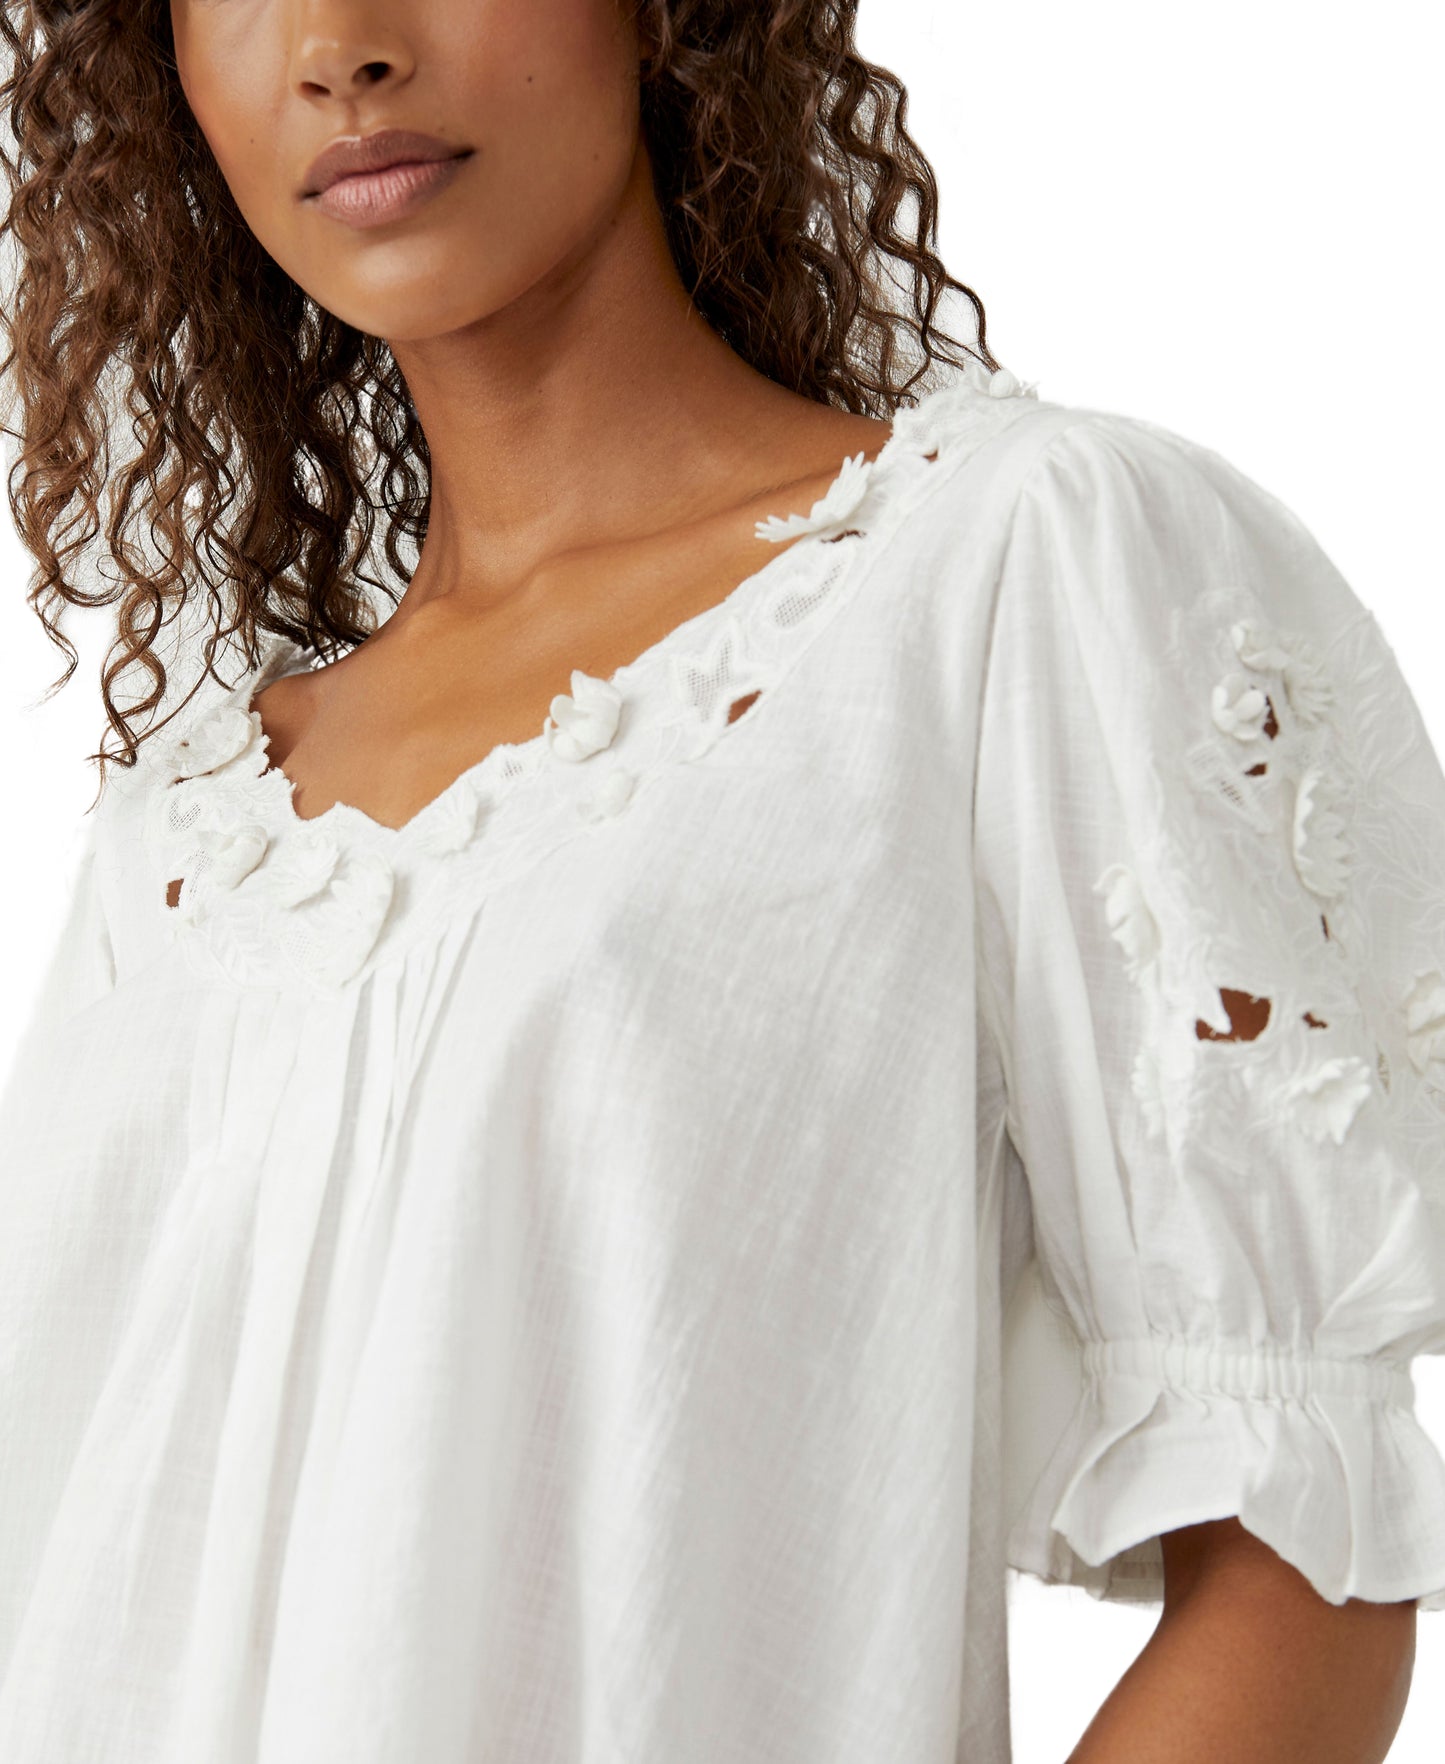 Free People Sophie Embroidered Top